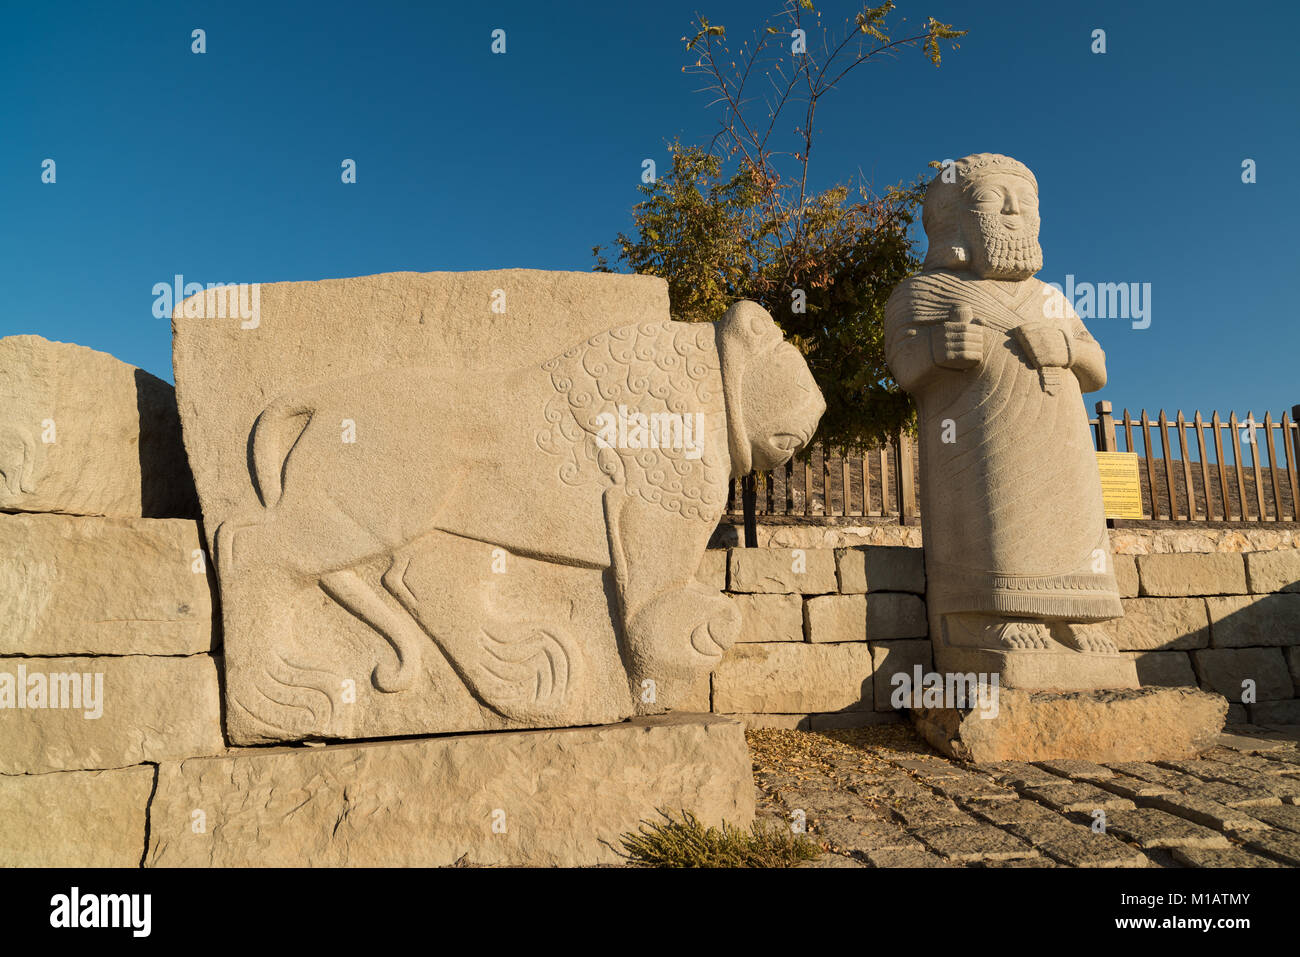 MALATYA - TURKEY - JANUARY 20, 2017; The remains of the historic Aslantepe. Malatya province history and tourist attractions. Prehistoric sculptures a Stock Photo